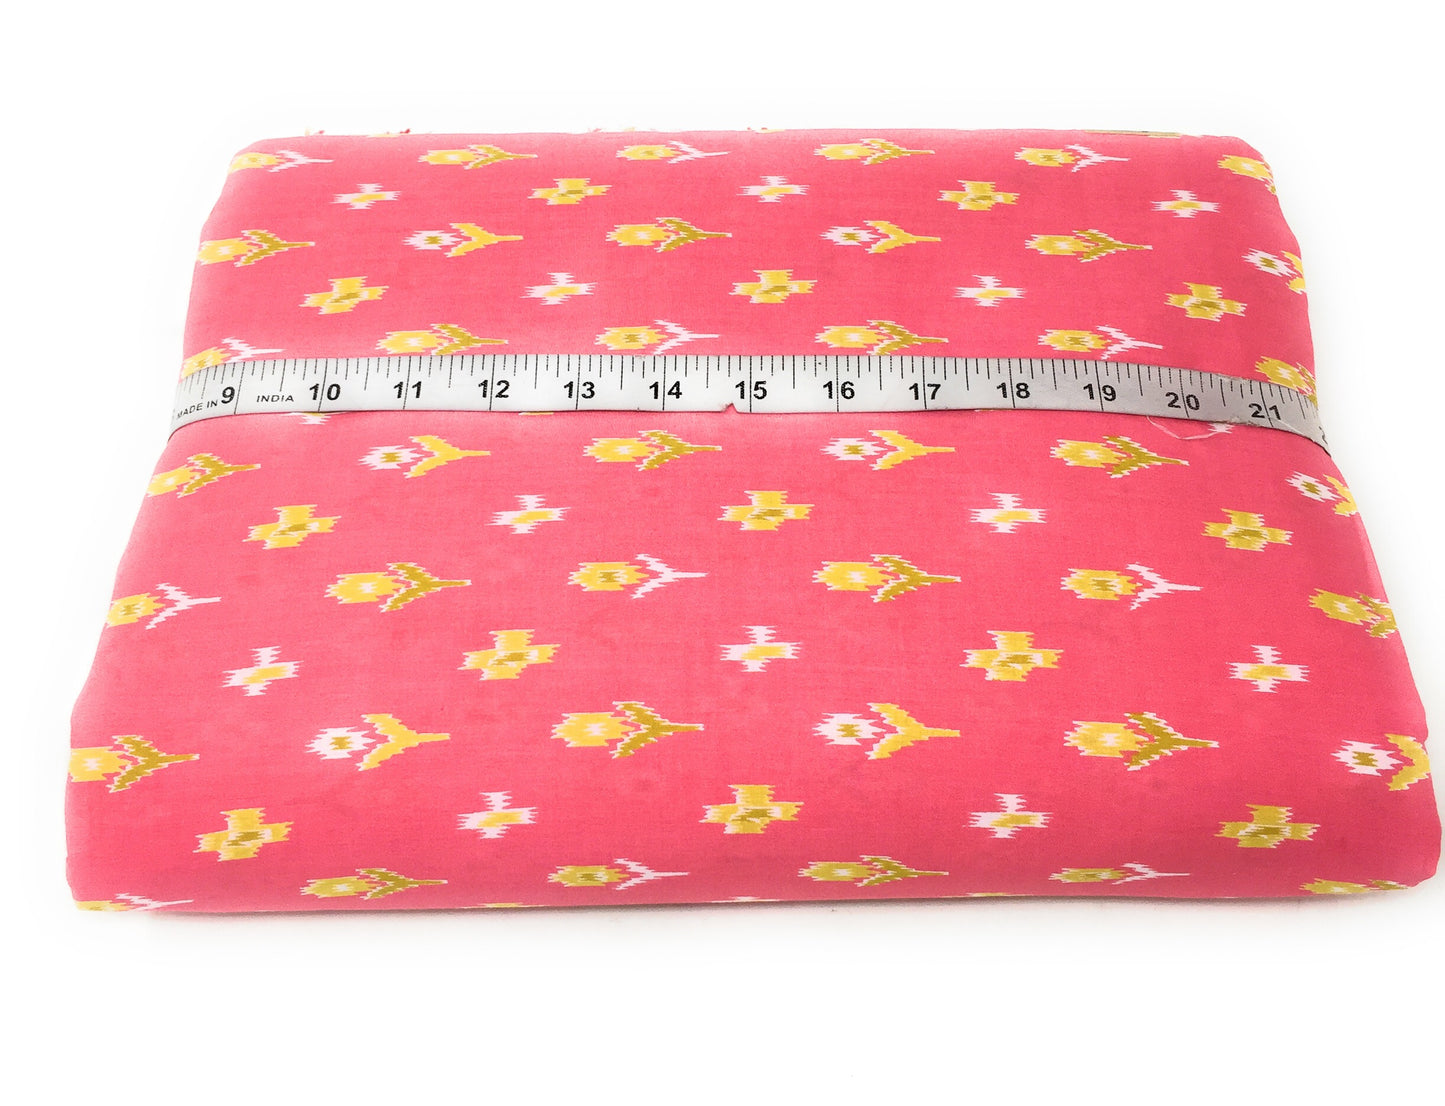 Pink Floral Printed Cotton Fabric